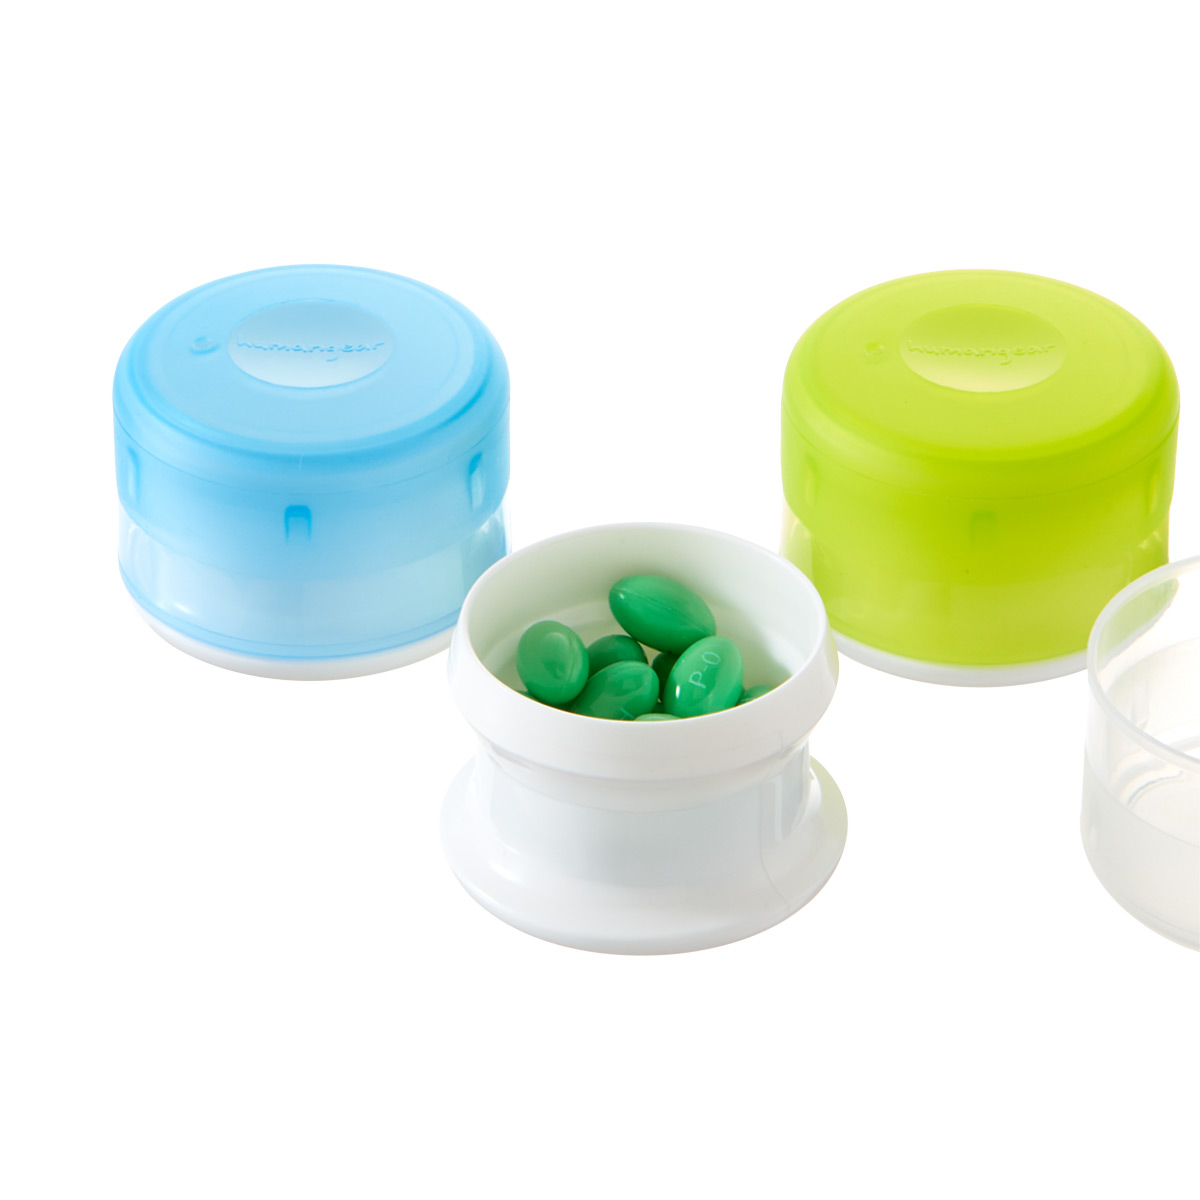 https://www.containerstore.com/catalogimages/323786/10060786-SMALL-GOTUBB-ASSORTED-V2.jpg